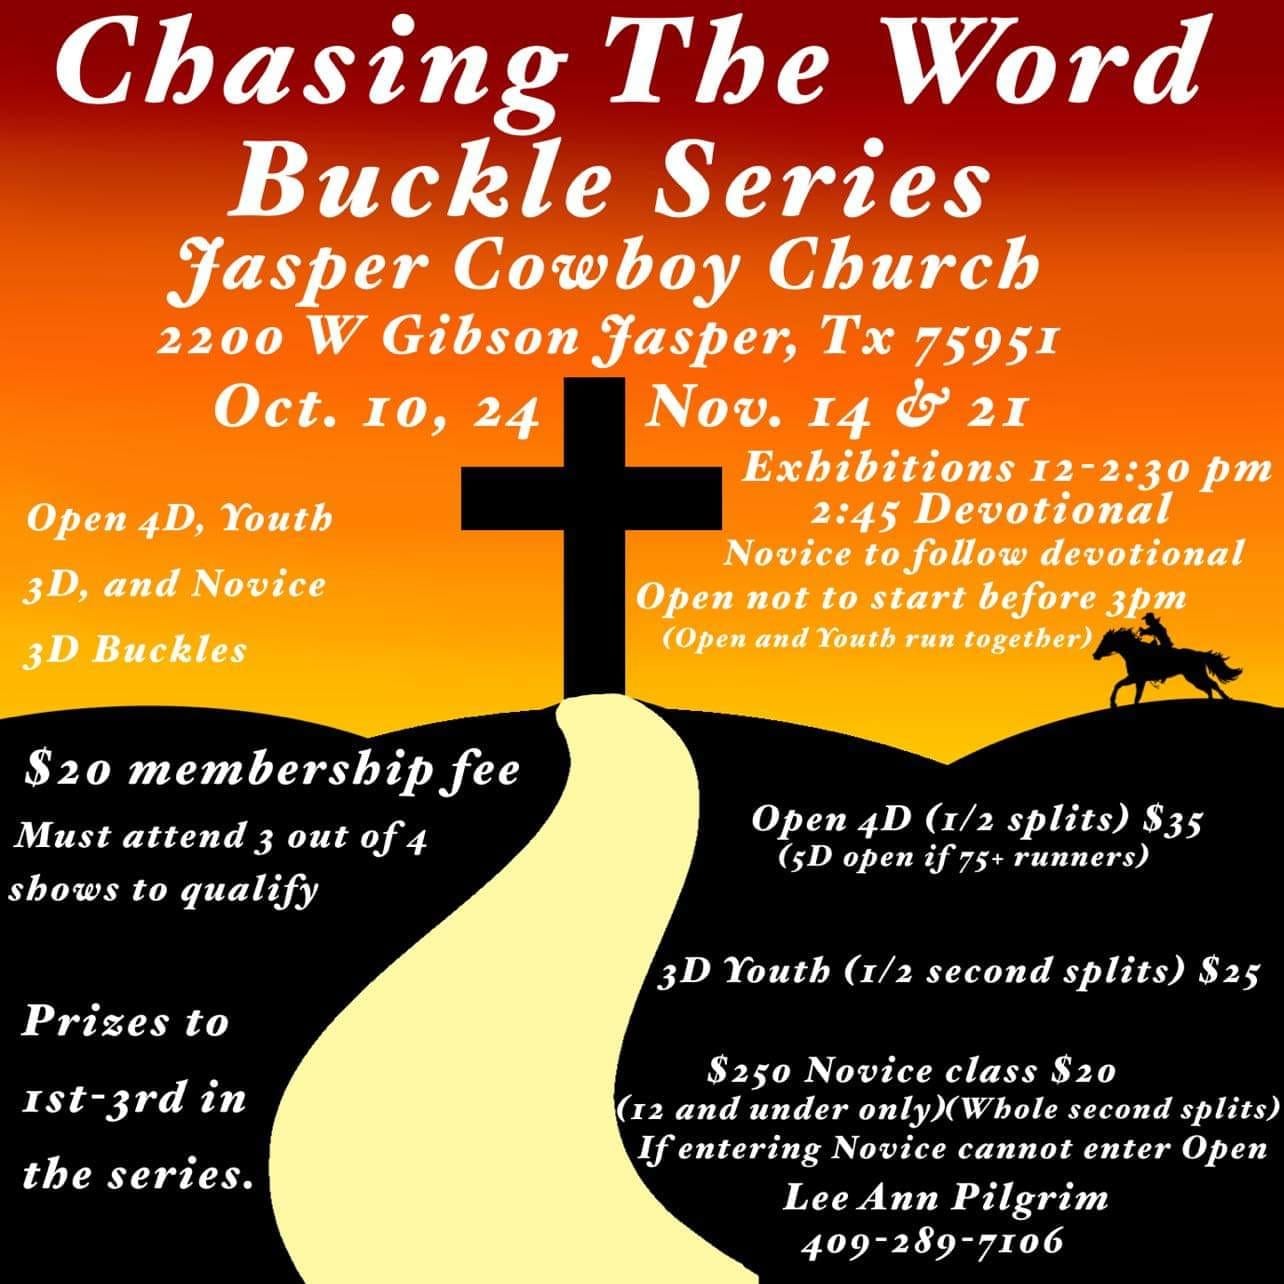 Chasing the Word Buckle Series